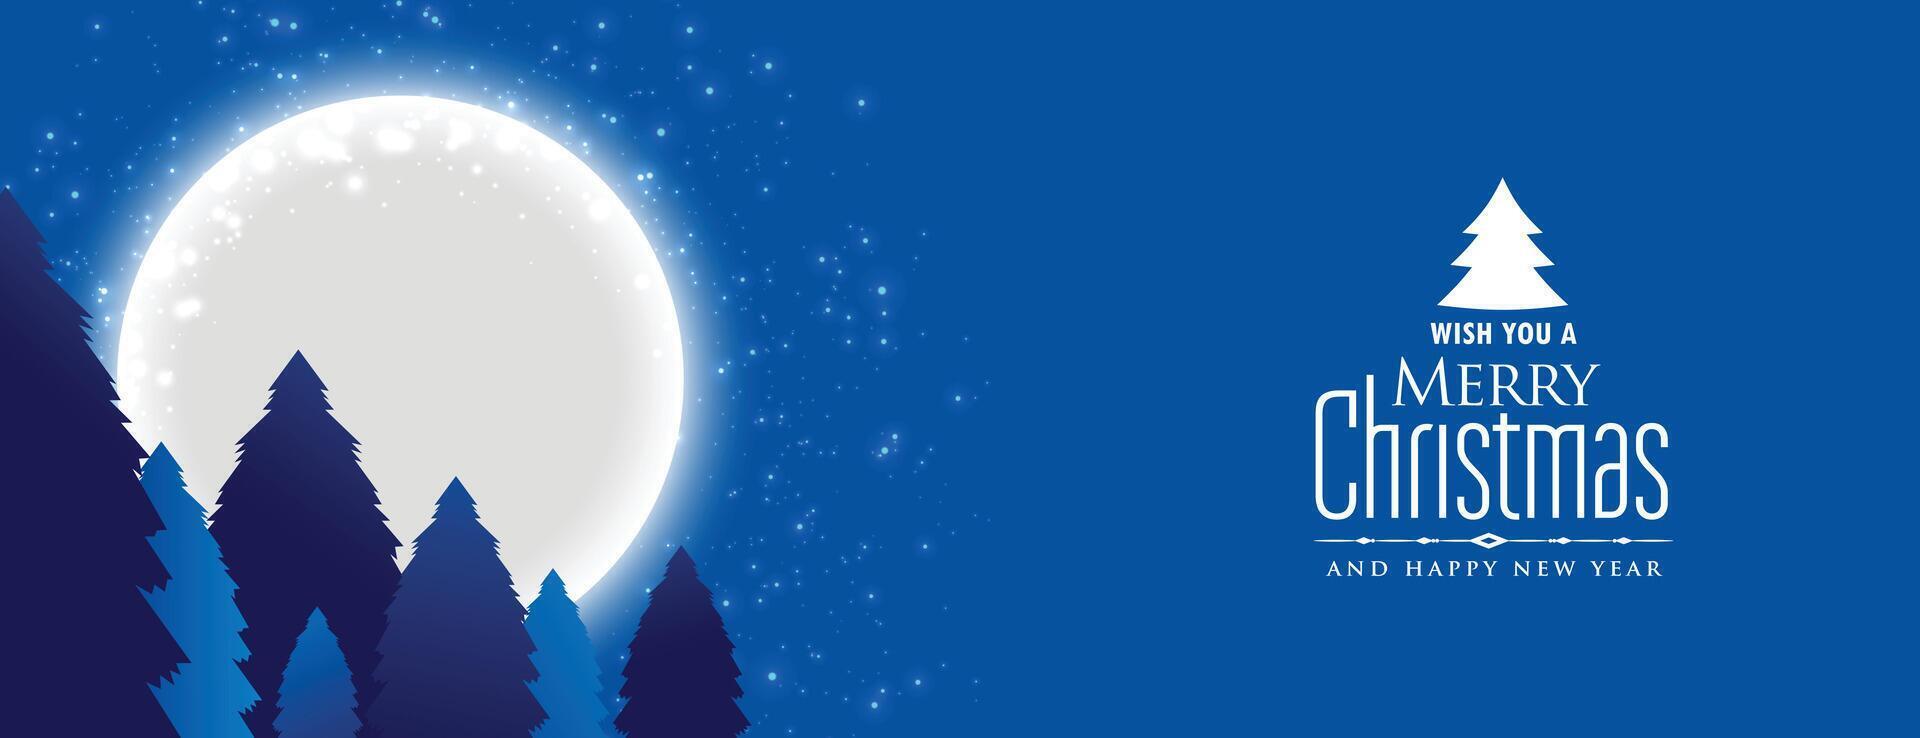 merry christmas night landscape with full moon vector